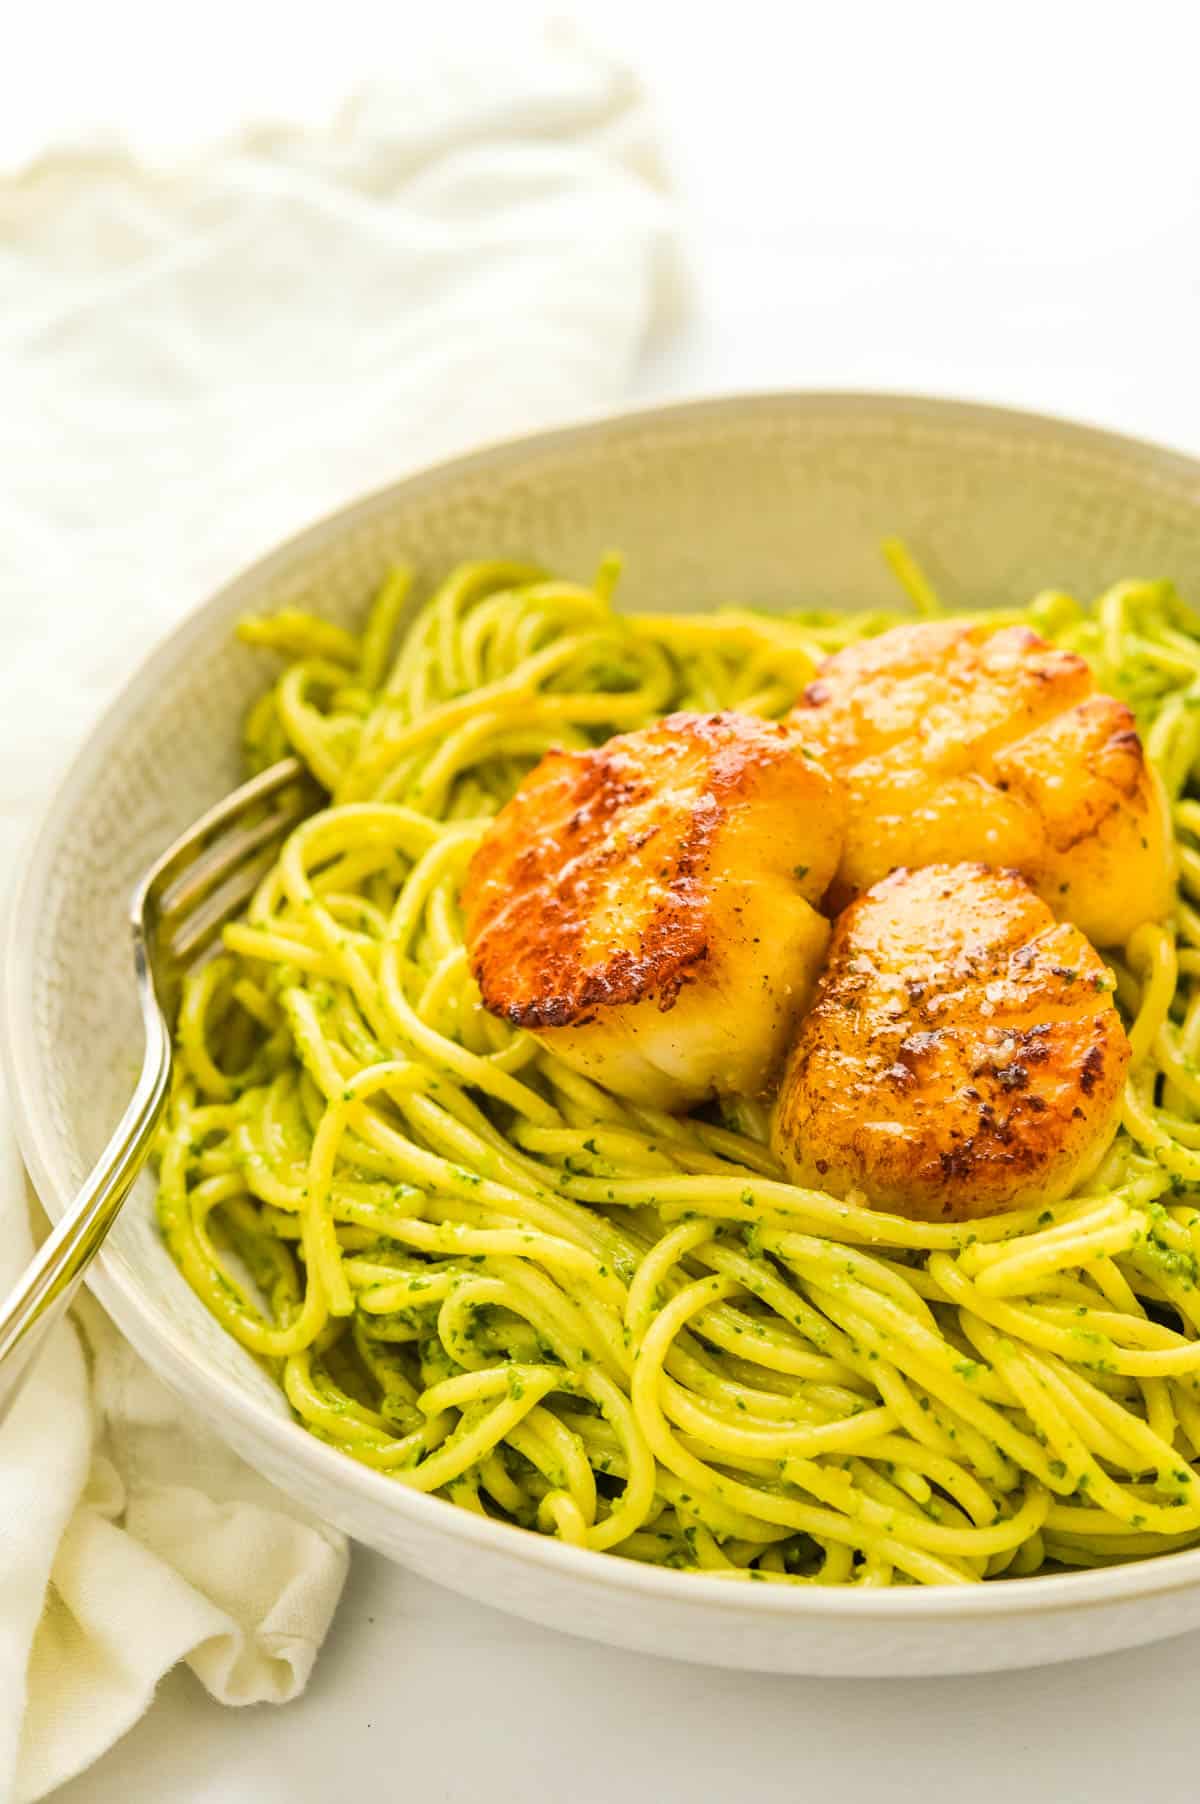 Topping a plate of pasta with seared sea scallops.